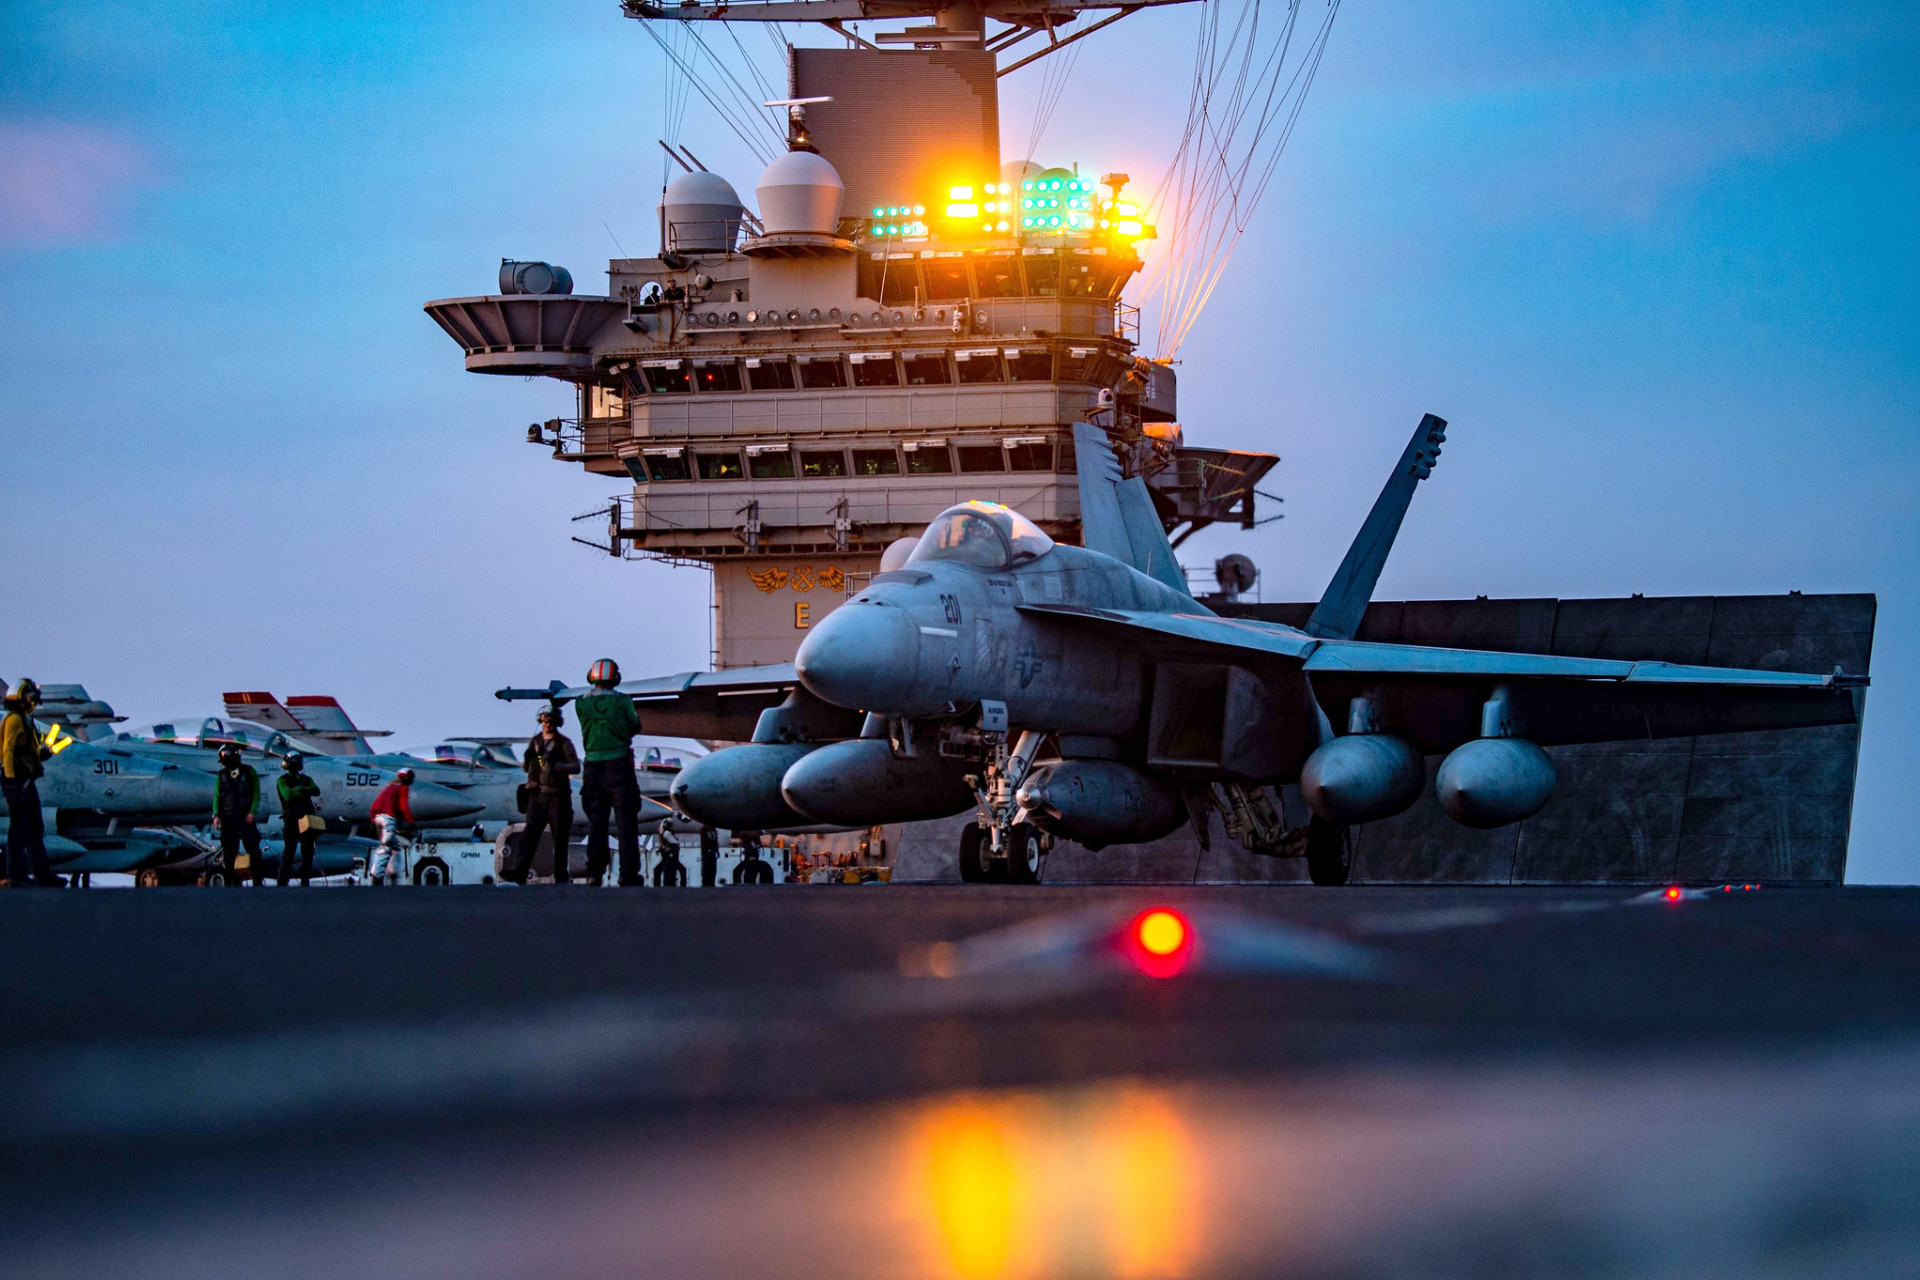 A fighter jet laying aboard a navy battleship